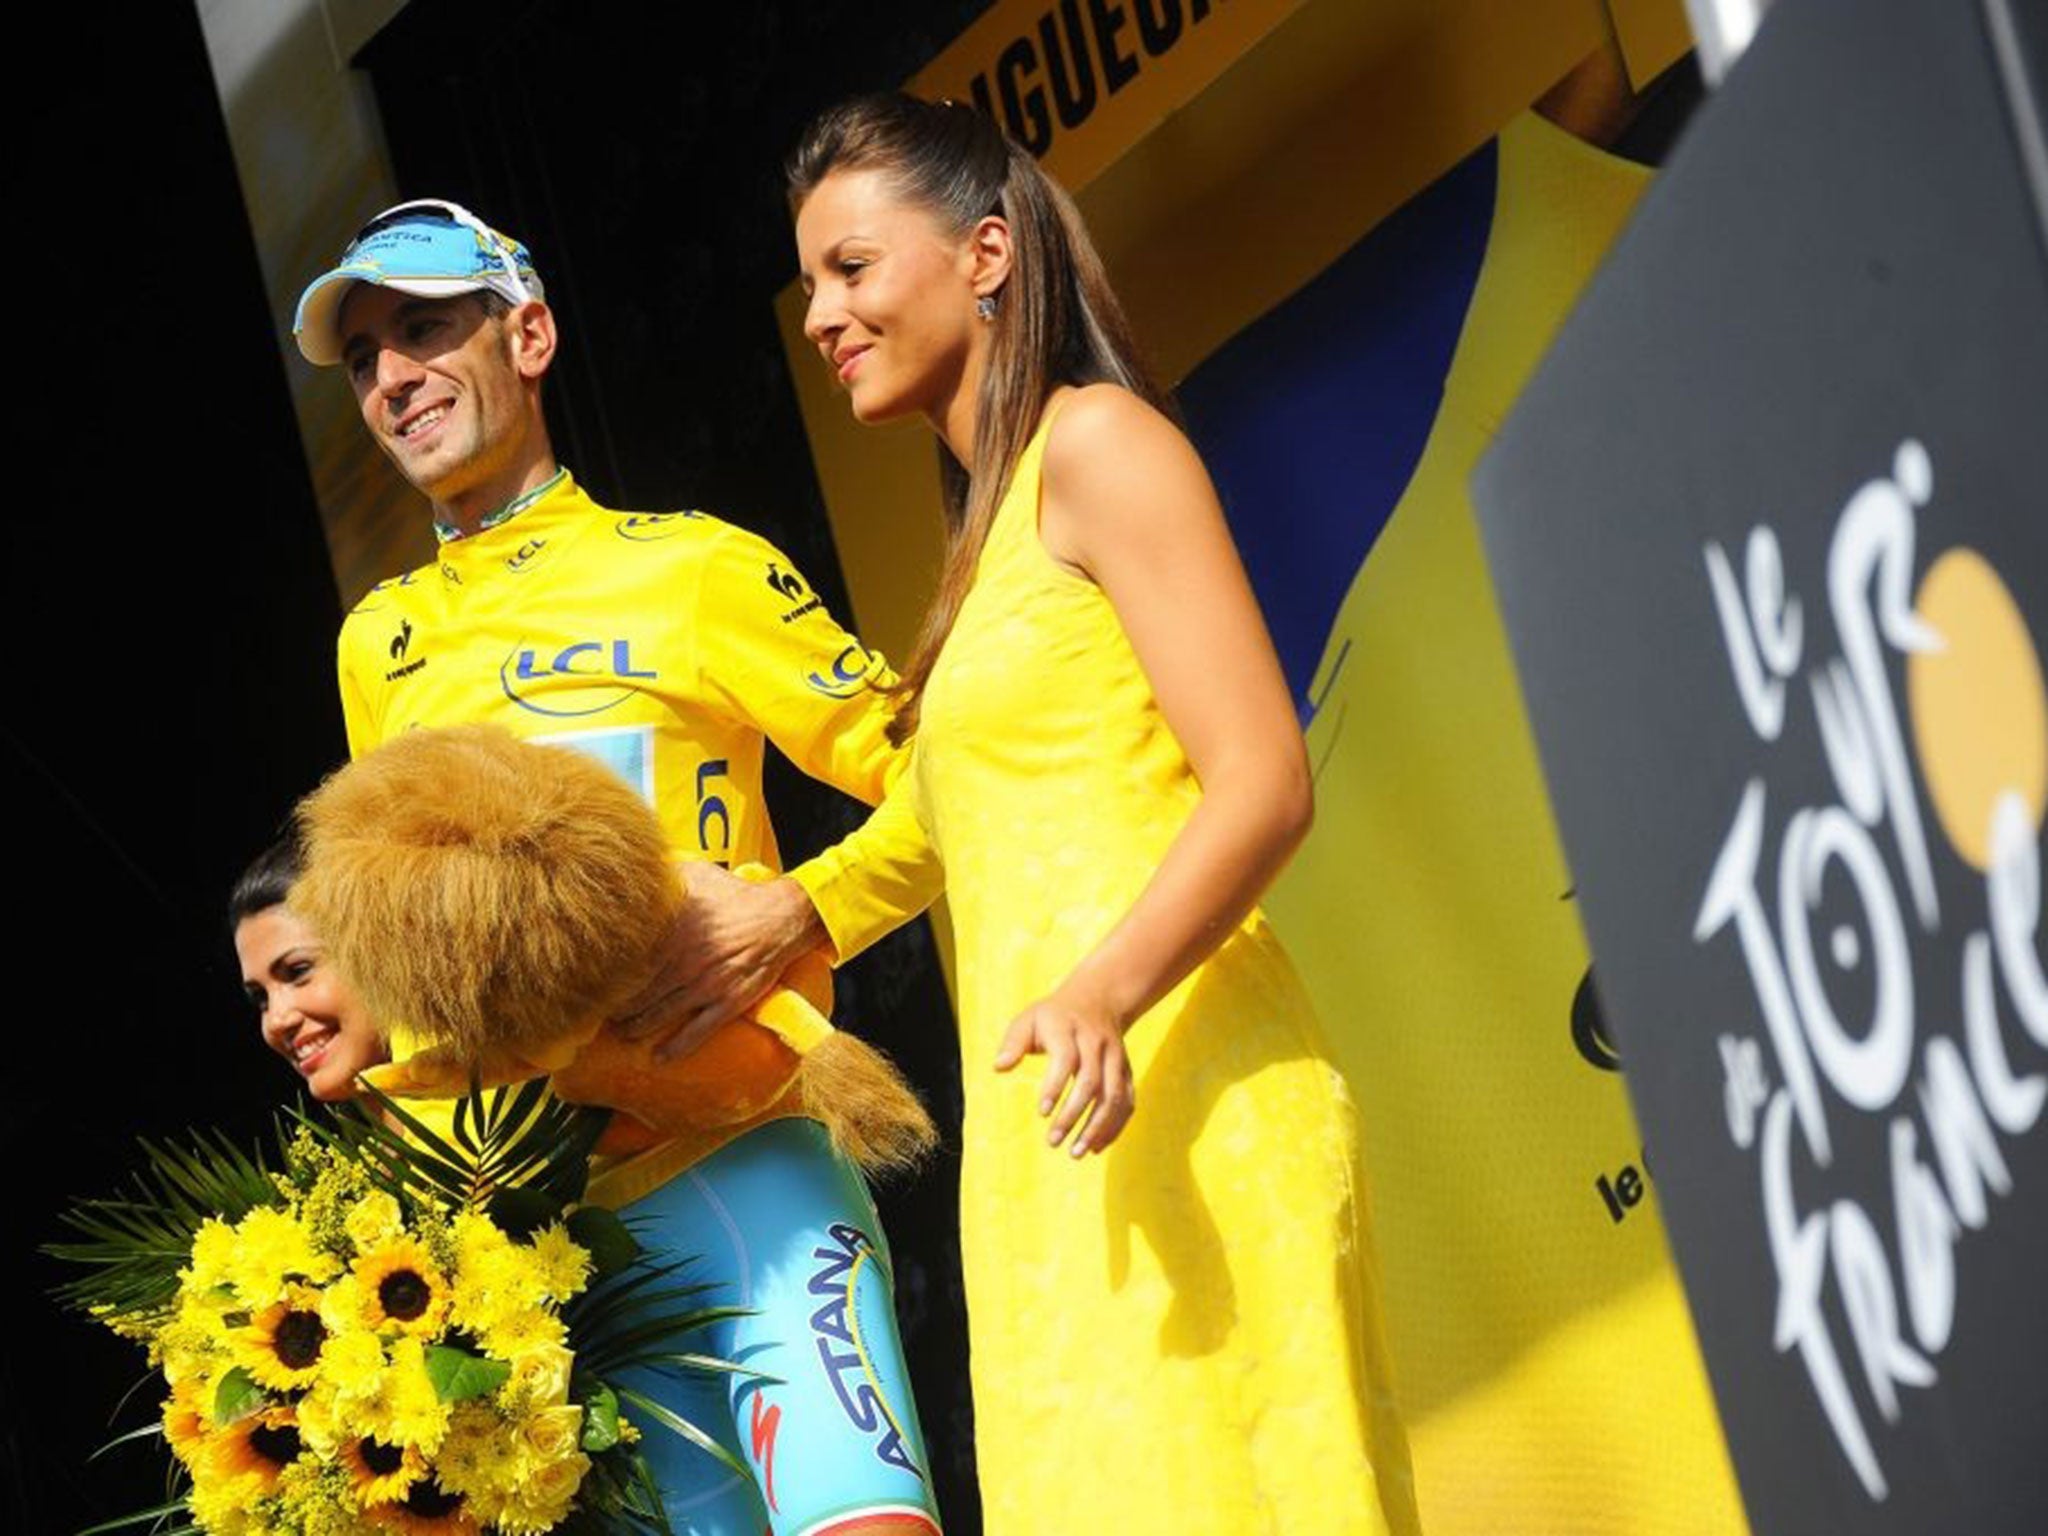 Nibali on the podium in the overall leader’s yellow jersey